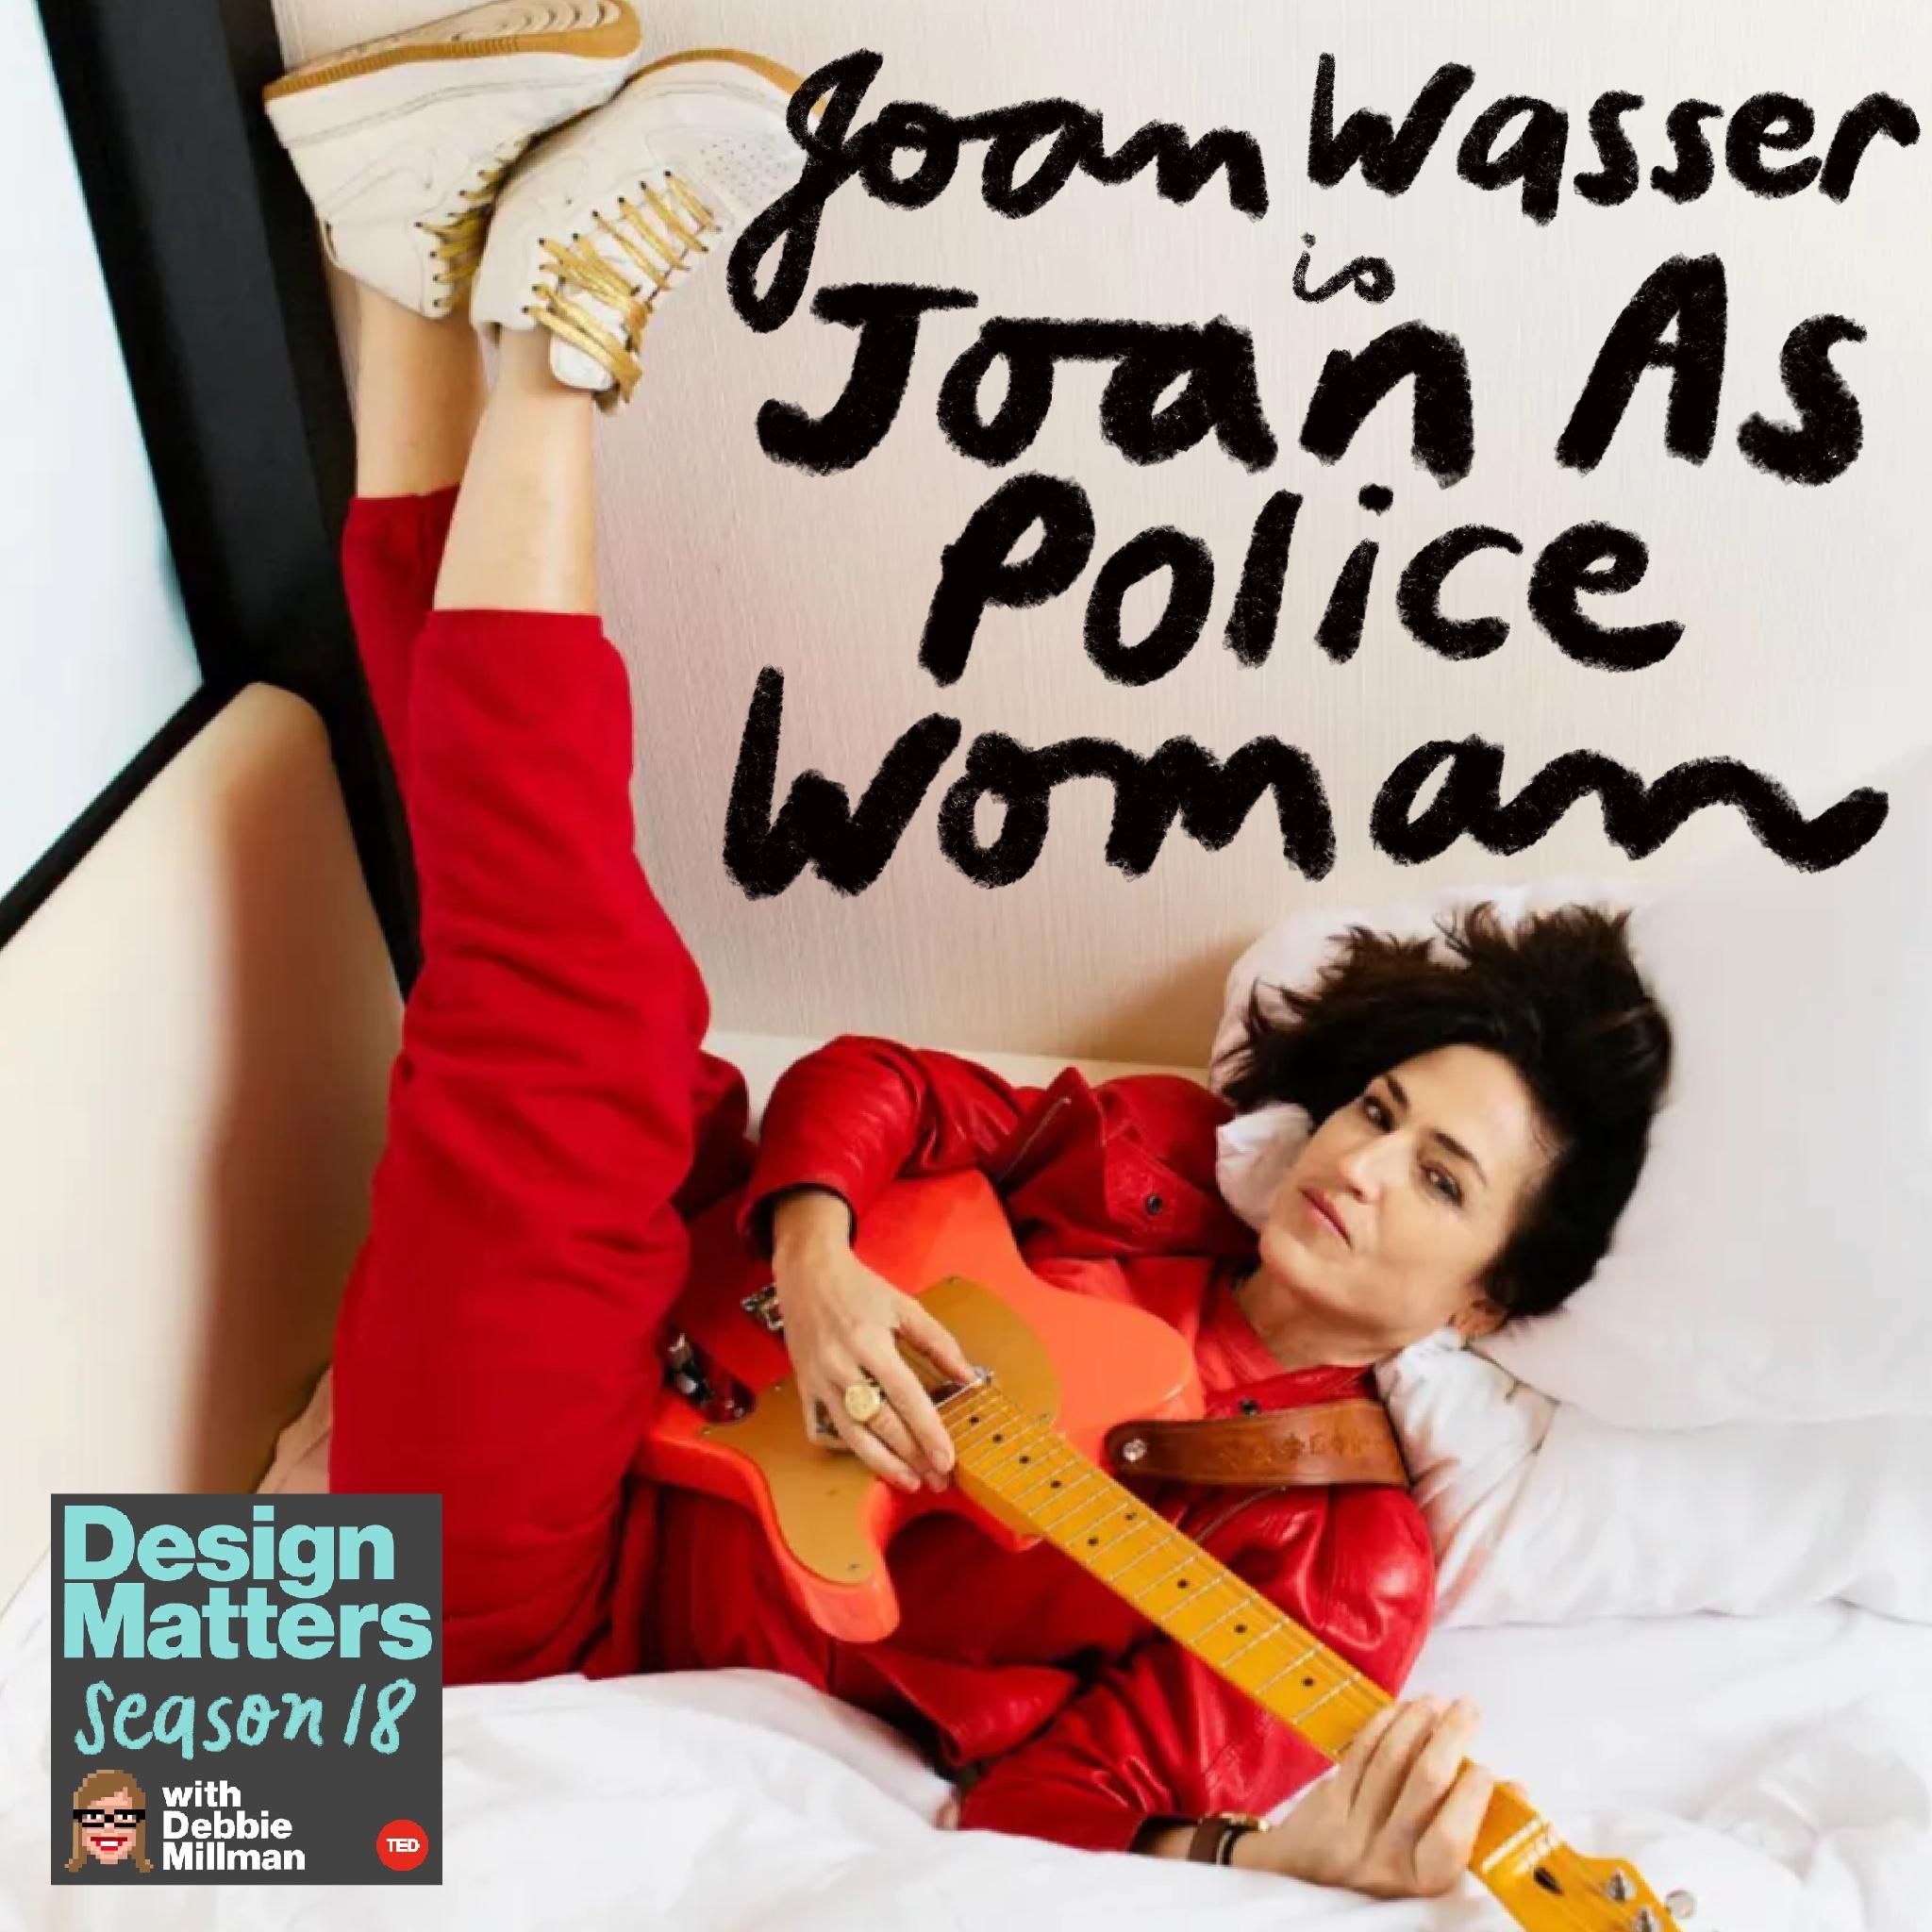 Thumbnail for "Best of Design Matters: Joan As Police Woman ".